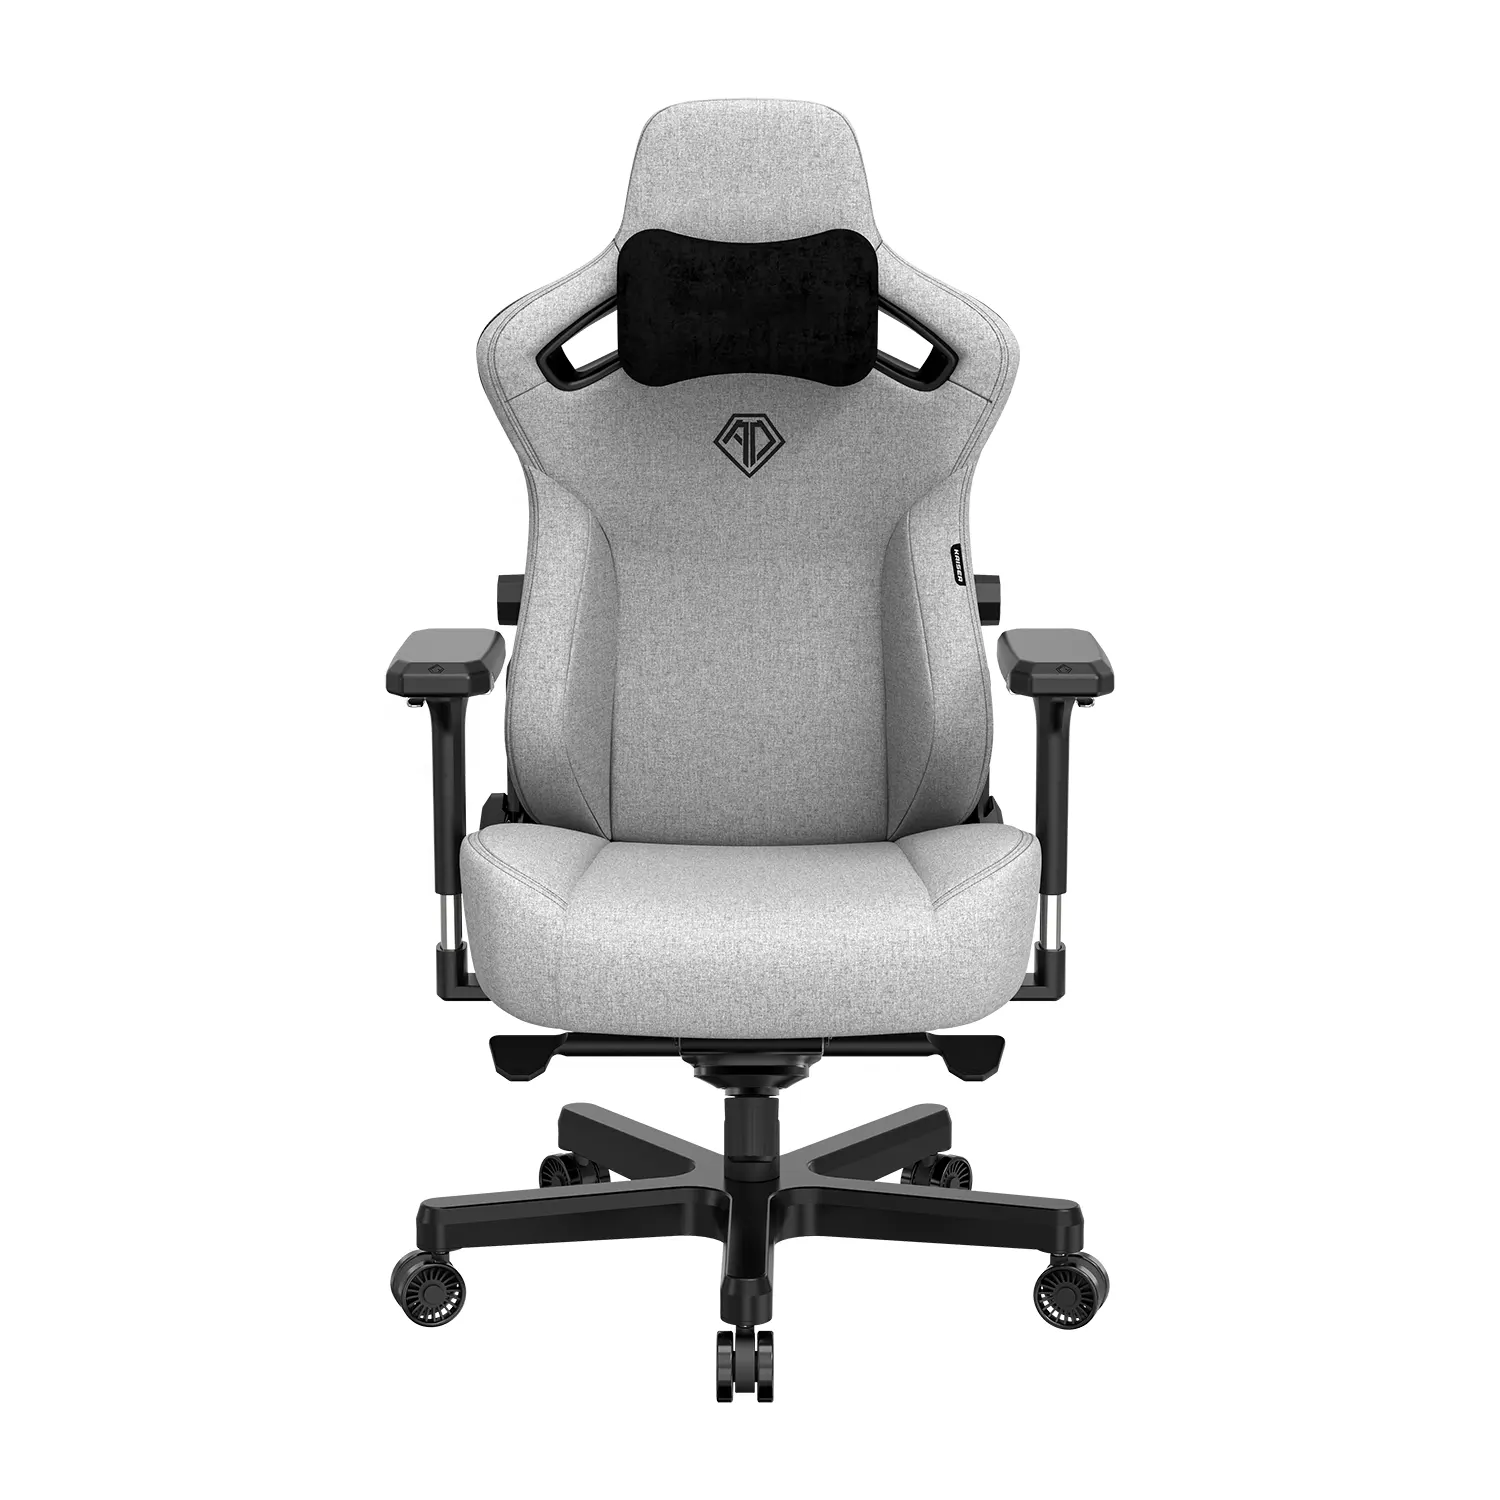 2022 Multiple Color Ash Gray Fabric Gaming Office Chair Safety and Durability Premium Gaming Chair up to 400lbs for Boos Manager